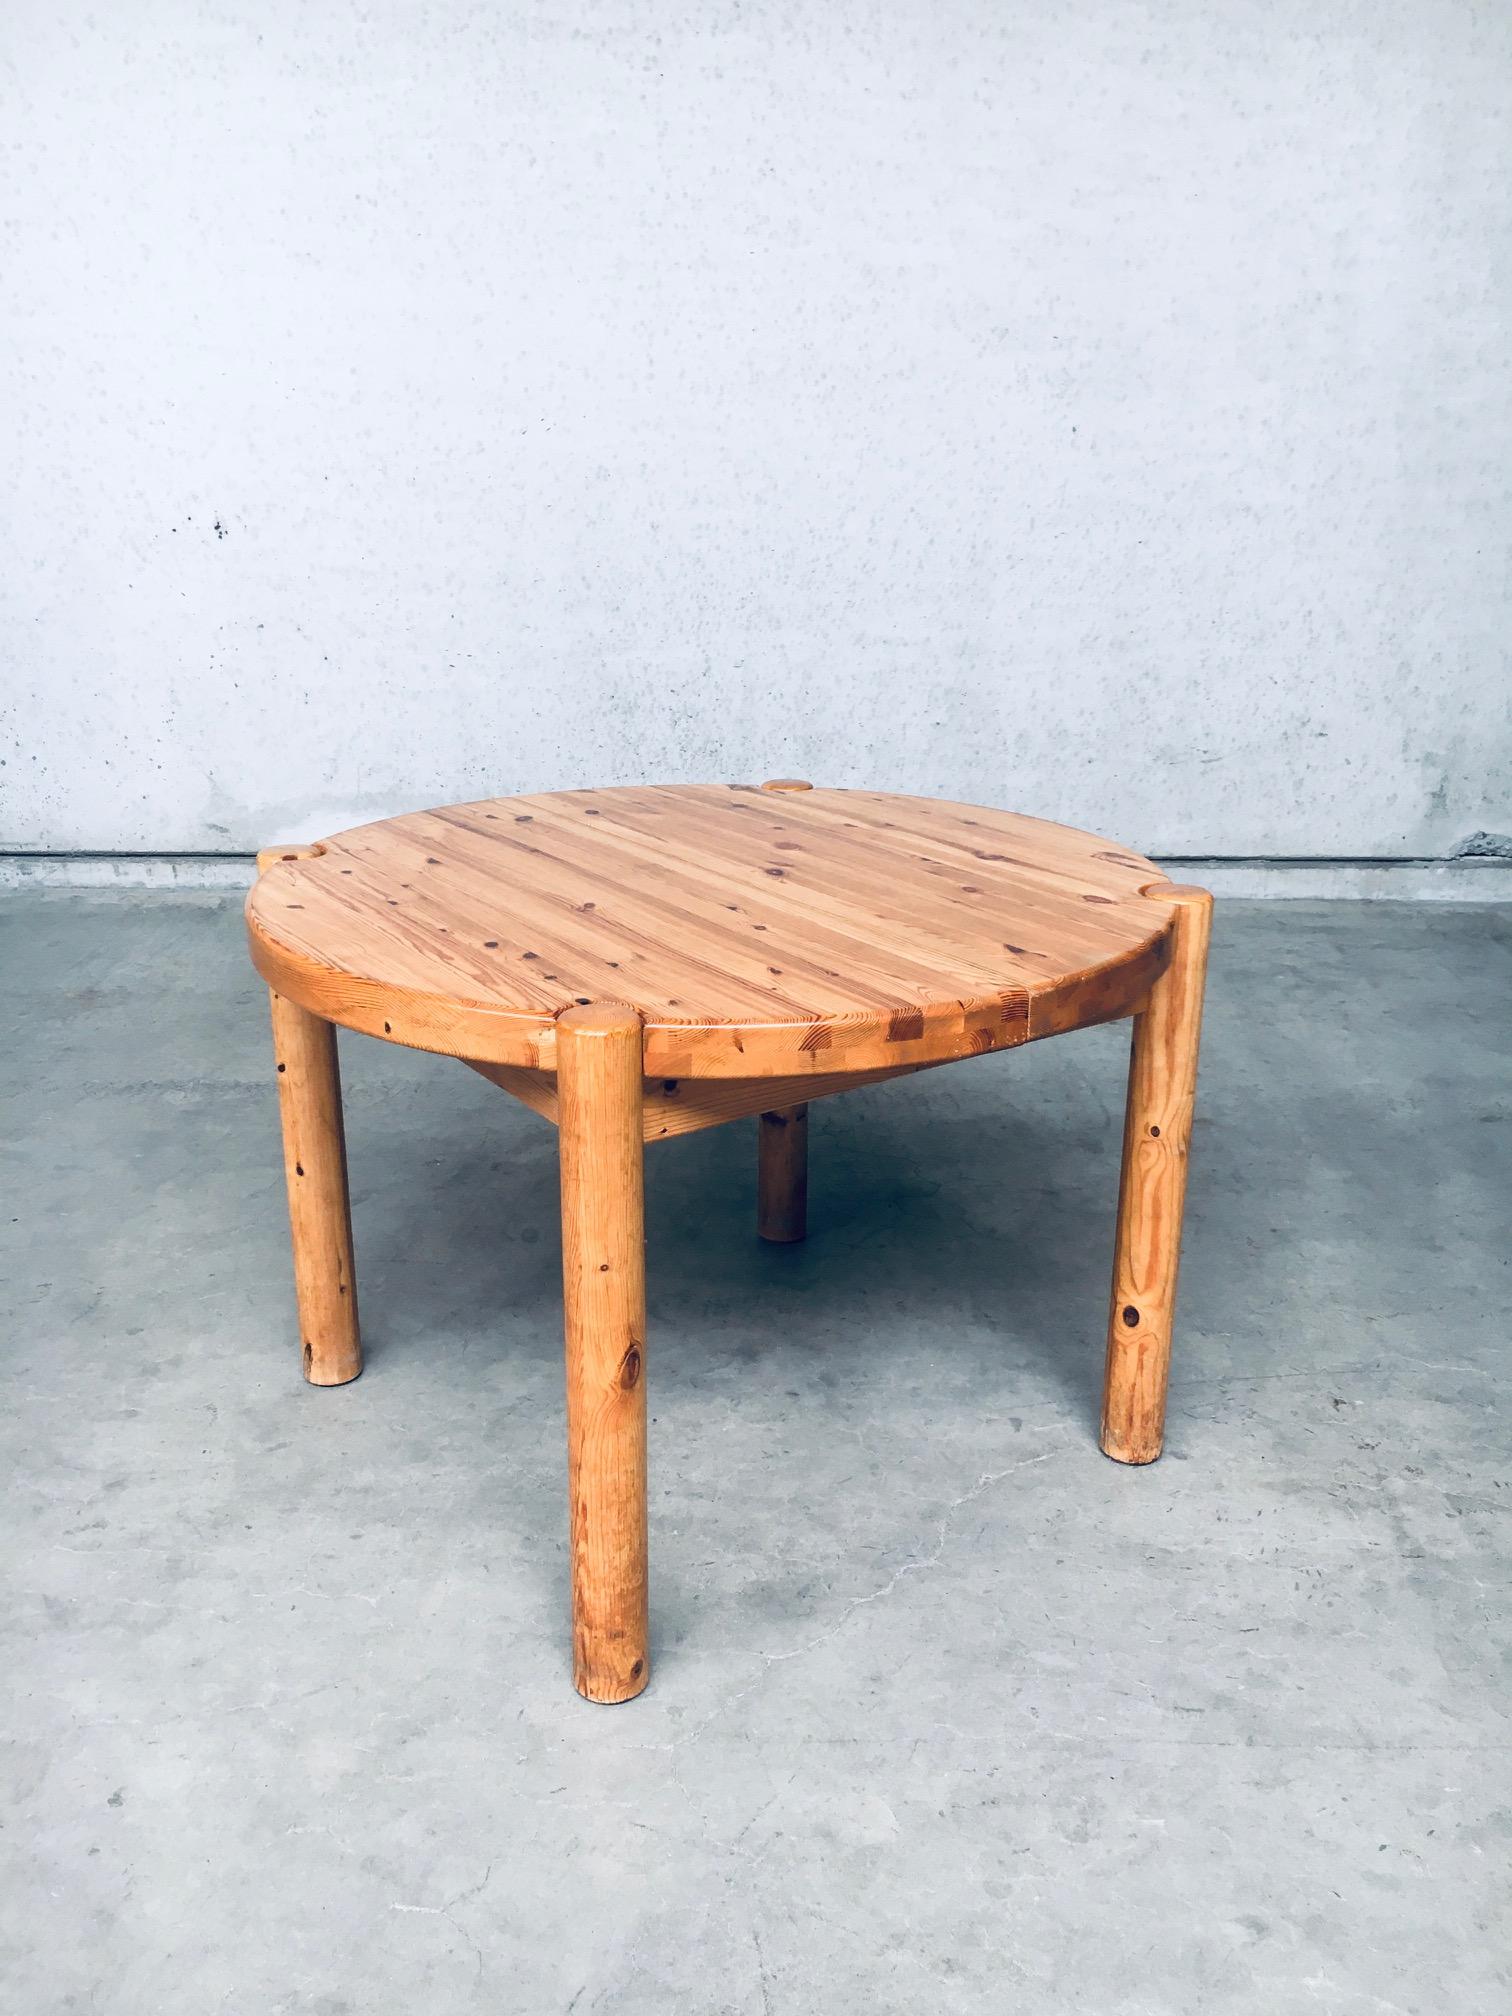 Vintage Midcentury Scandinavian Design Extendable Dining Table by Rainer Daumiller for Hirtshals Sawaerk, made in Denmark 1970's. Solid pine constructed table. Functional design that features a rounded tabletop when not extended and can be